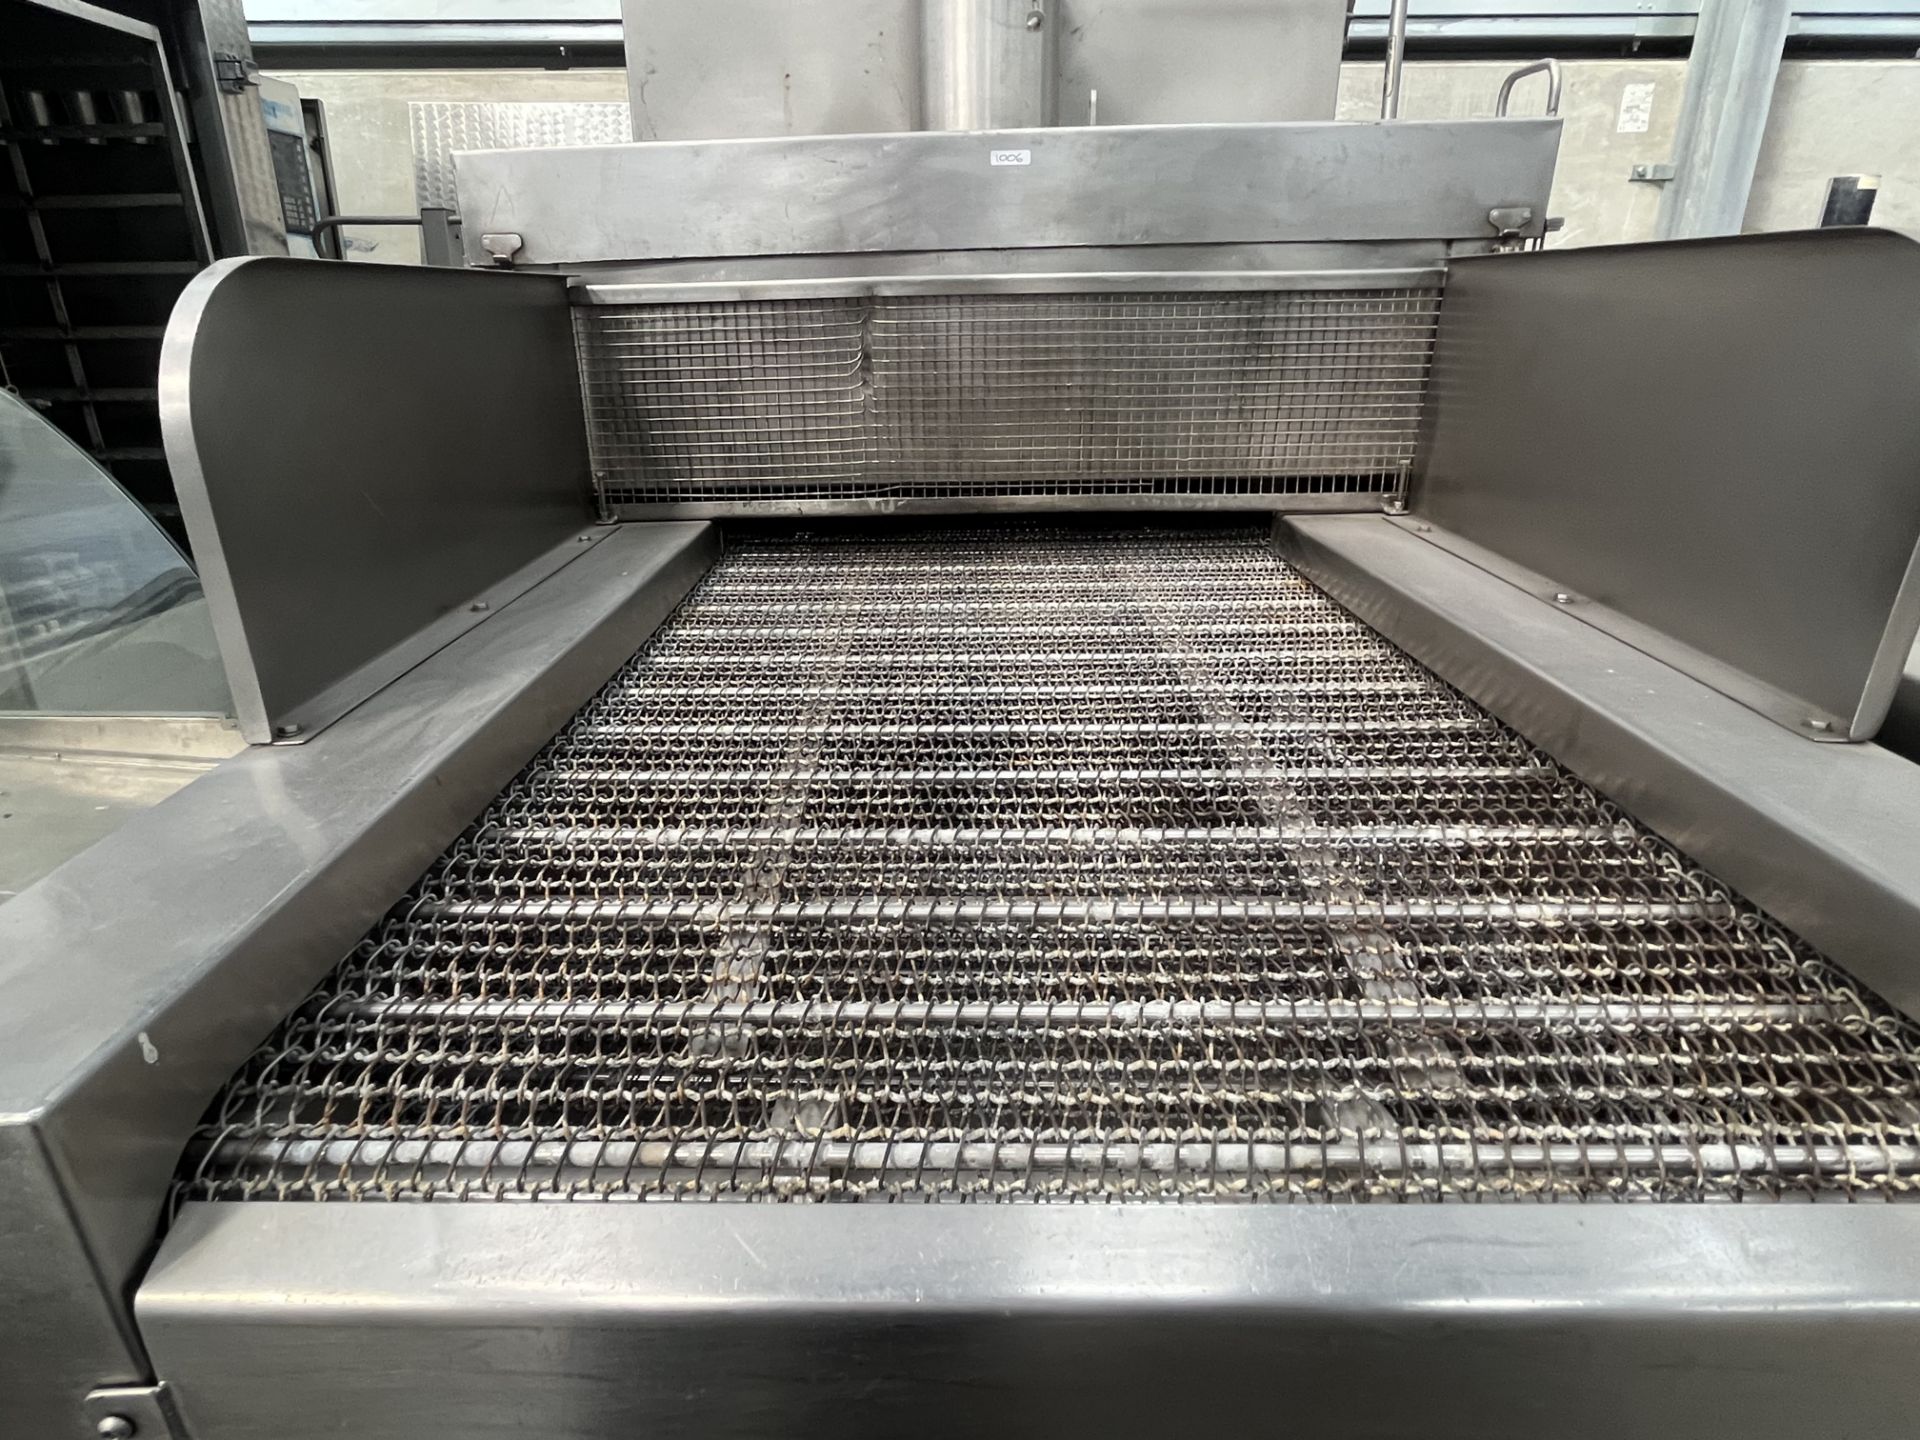 H+C INLINE TOP + BOTTOM GAS OVEN  3 PHASE POWER  600mm WIDE WIRE CONVEYER  HEIGHT - approx - - Image 2 of 11